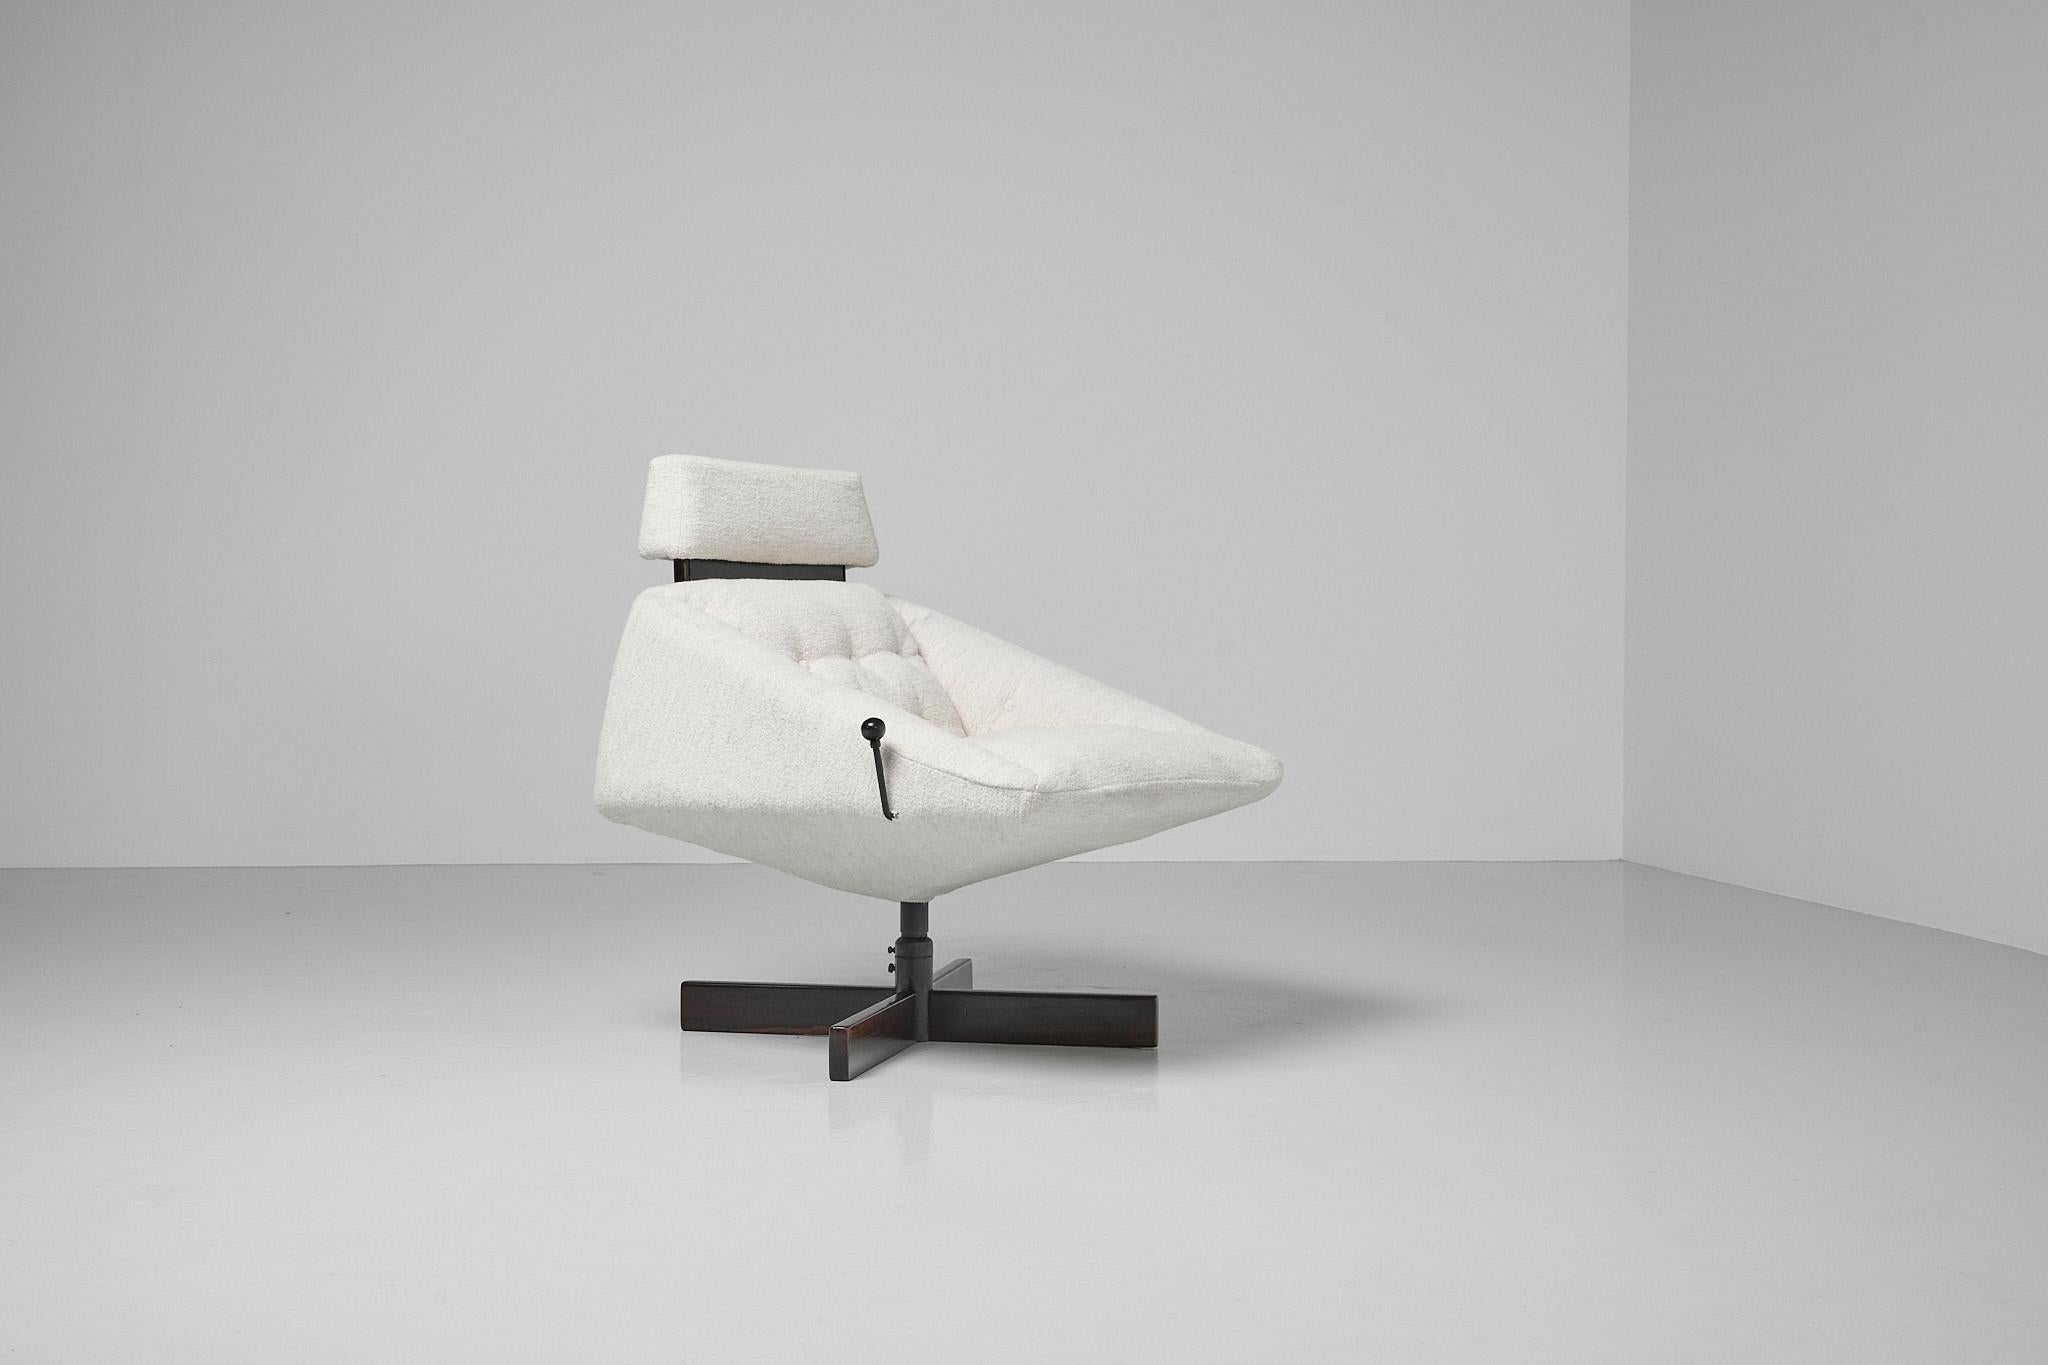 Percival Lafer Adjustable Lounge Chair MP, Brazil, 1970 In Good Condition For Sale In Roosendaal, Noord Brabant